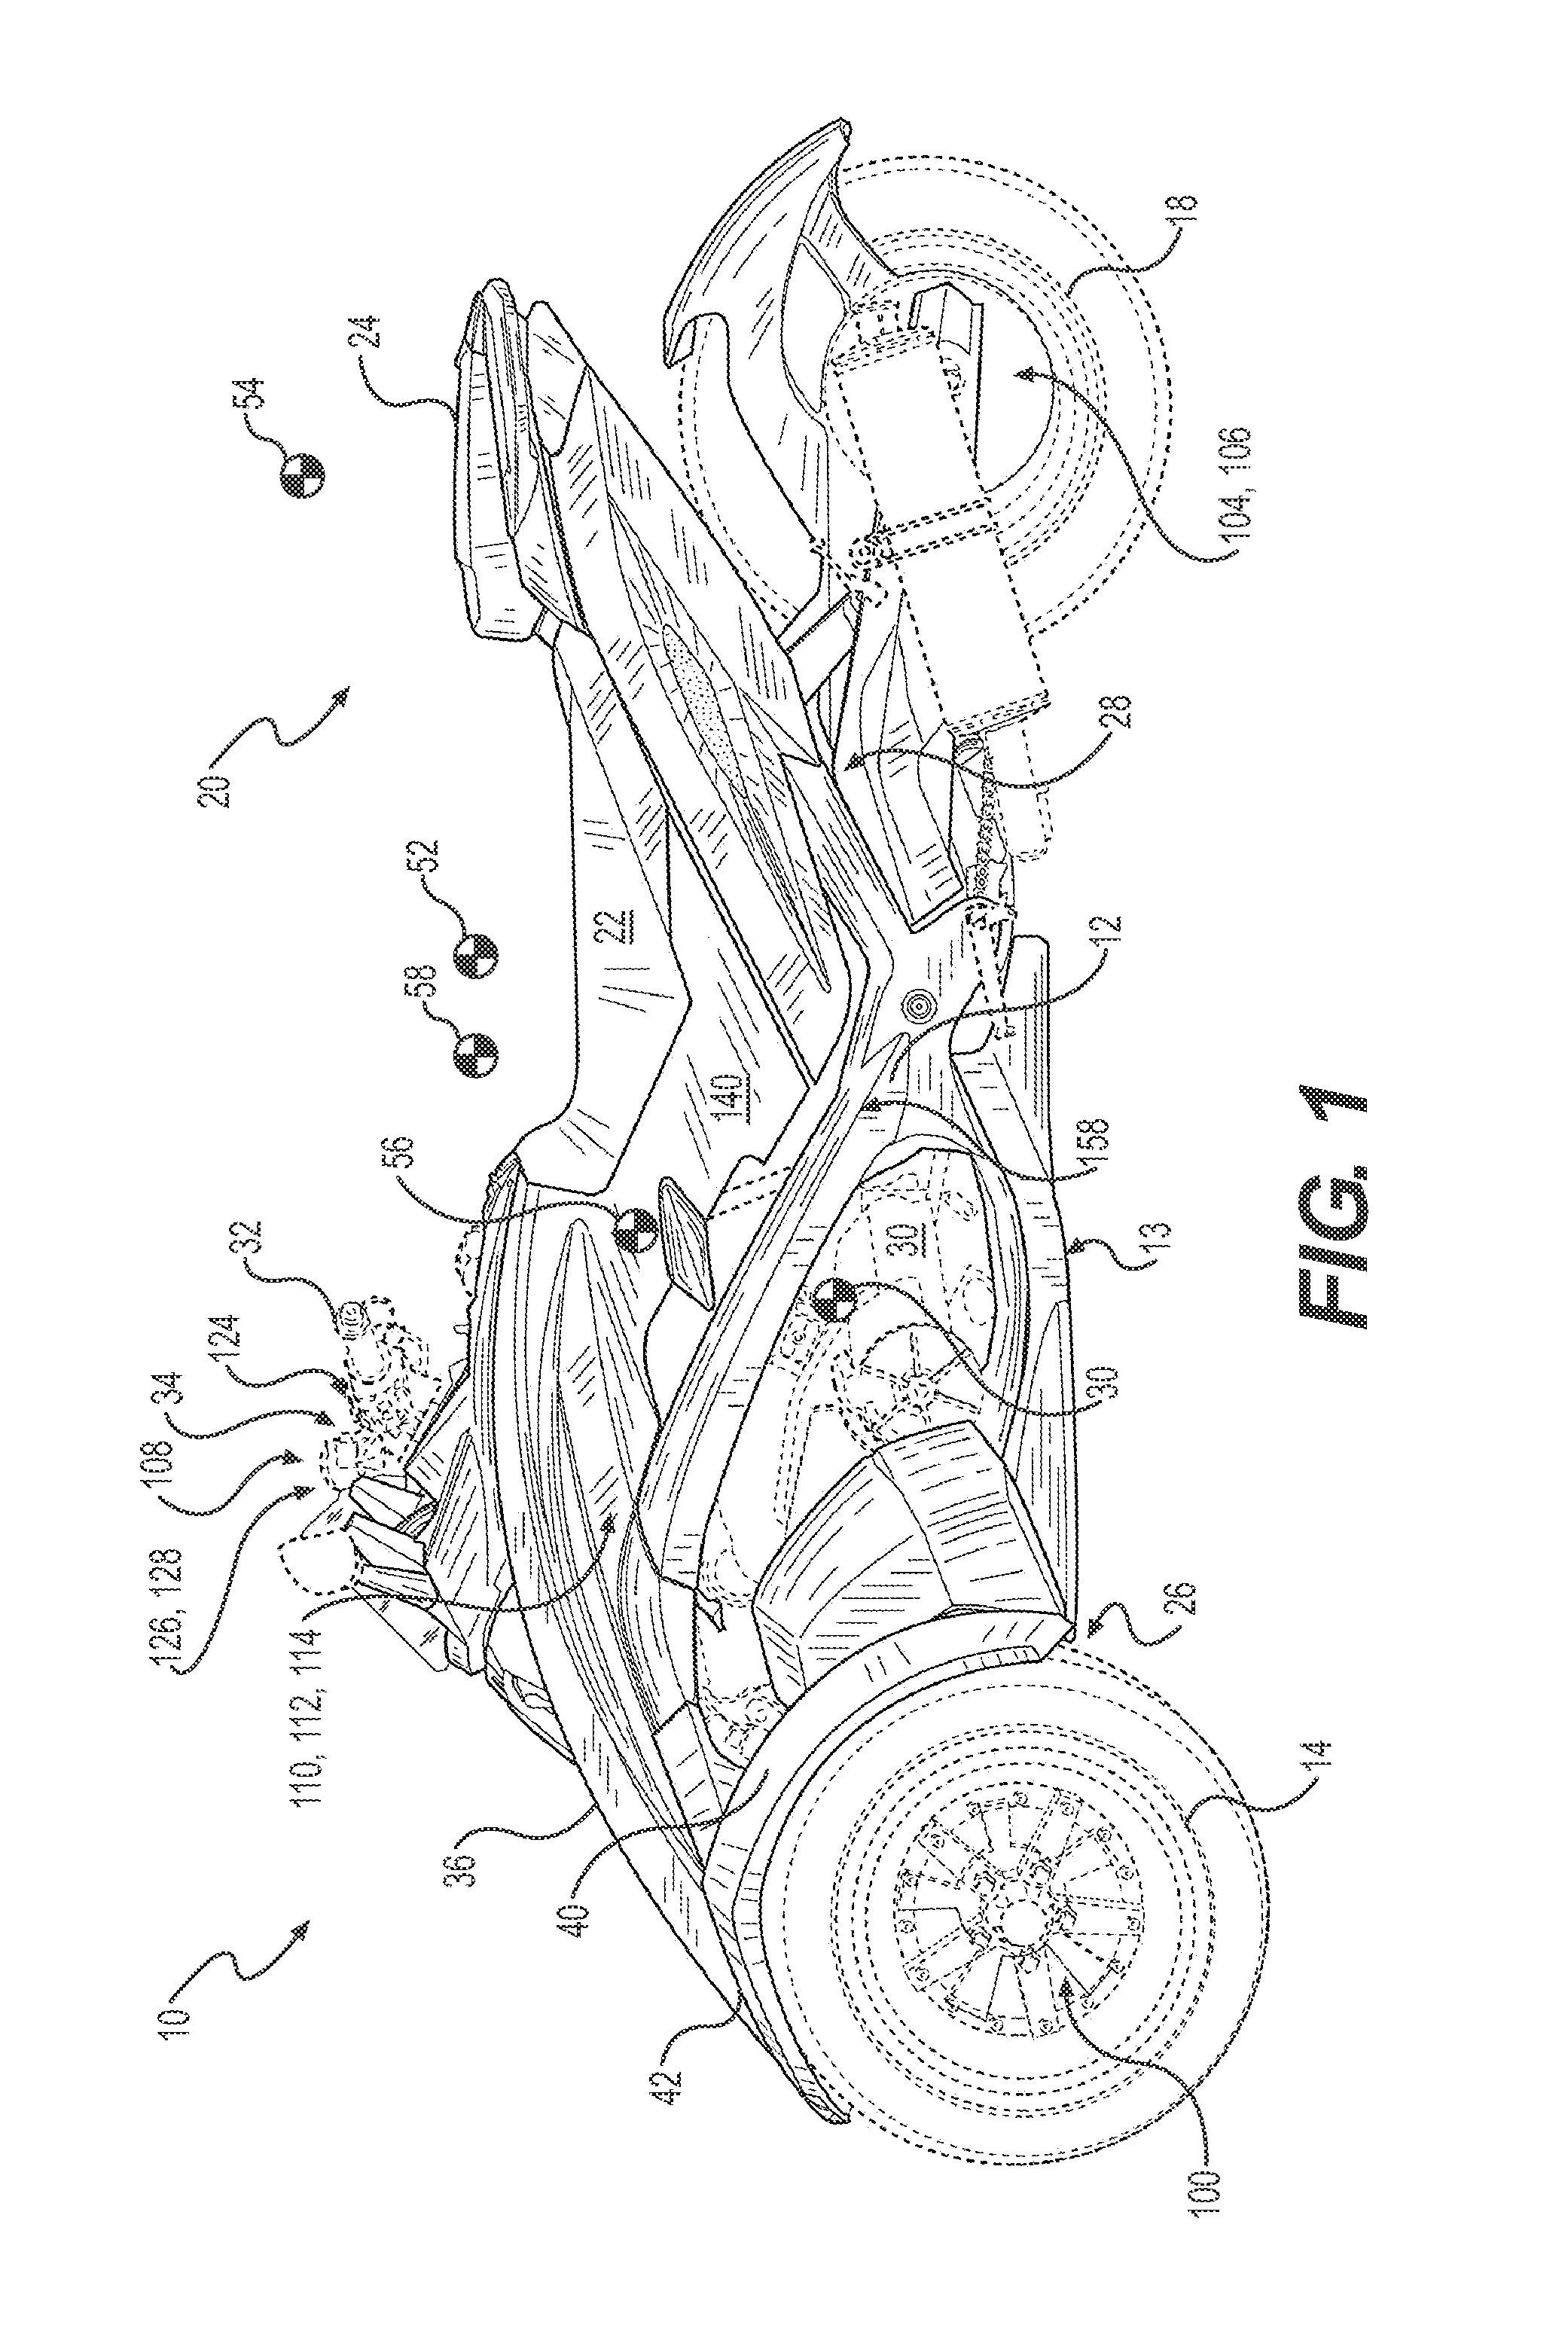 Load sensor for a vehicle electronic stability system